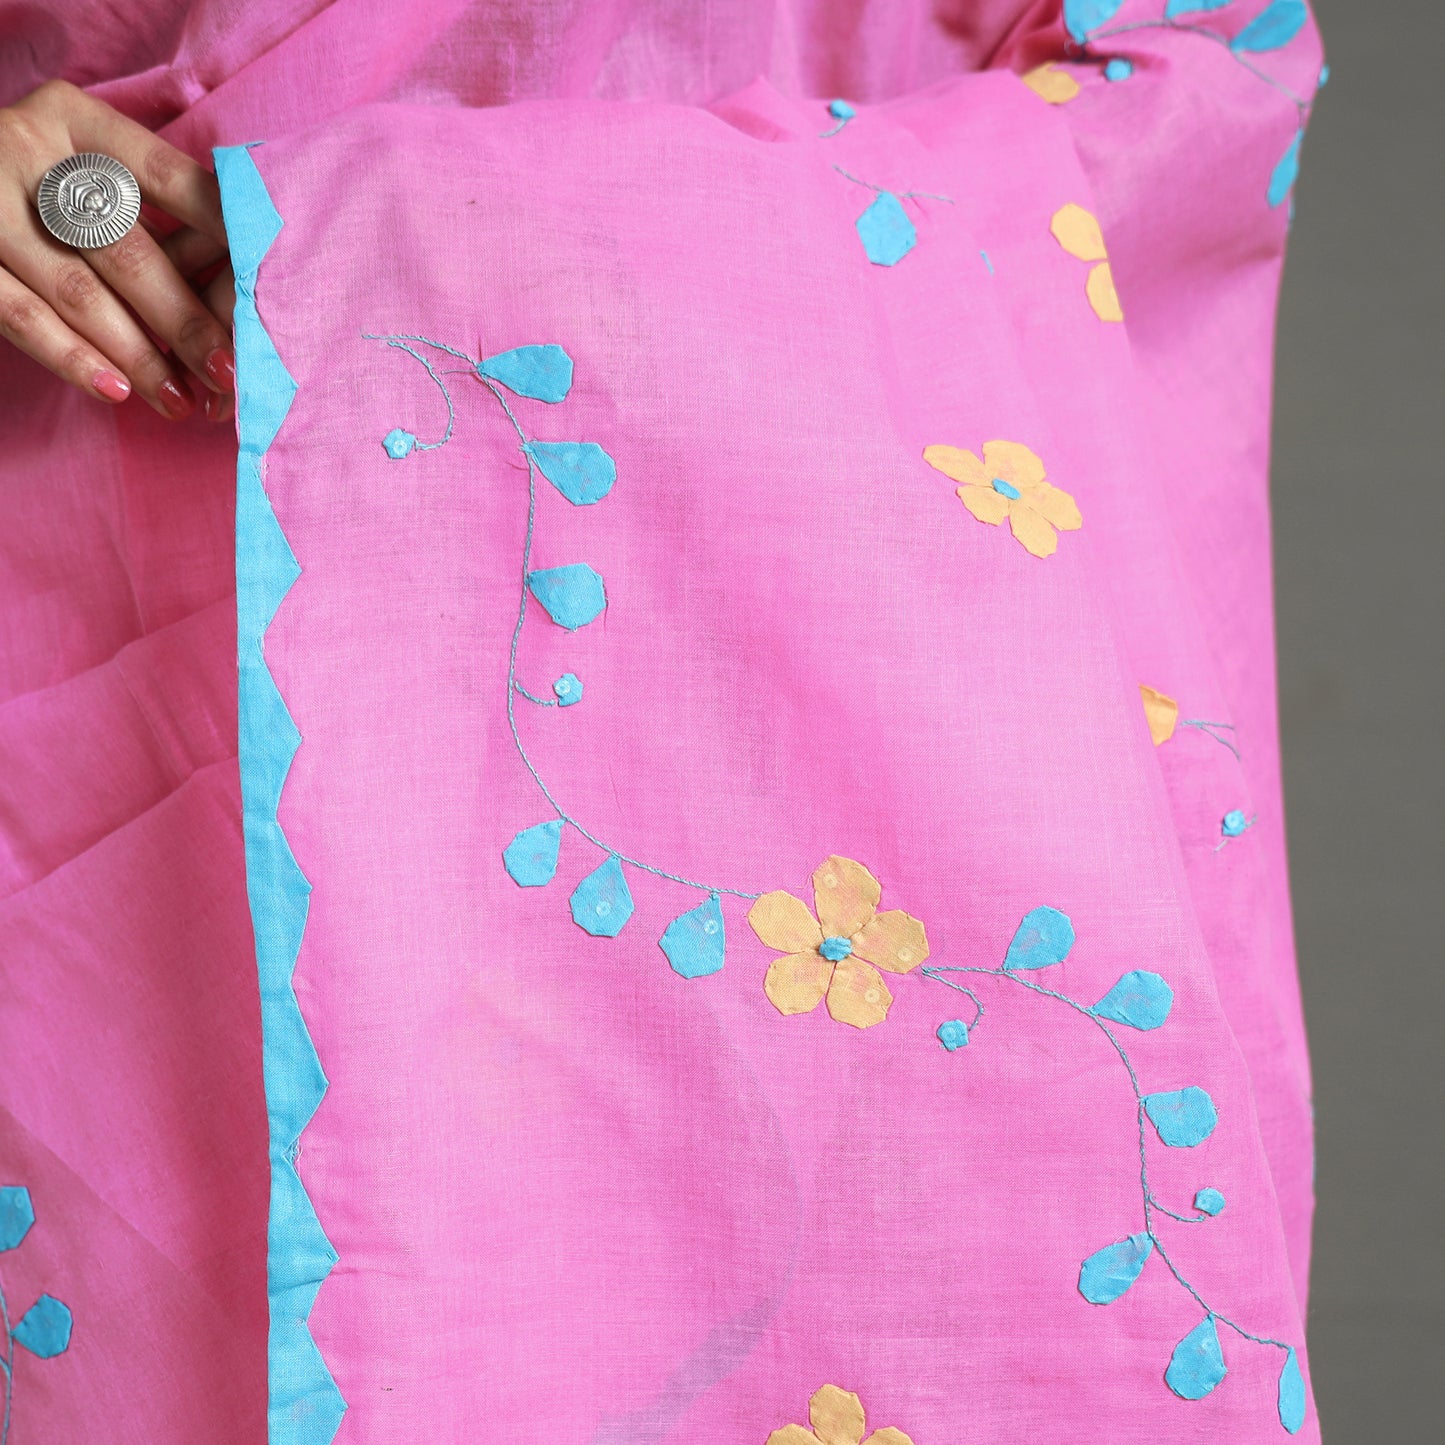 Pink - Applique Patti Kaam Pure Cotton Saree from Rampur 13